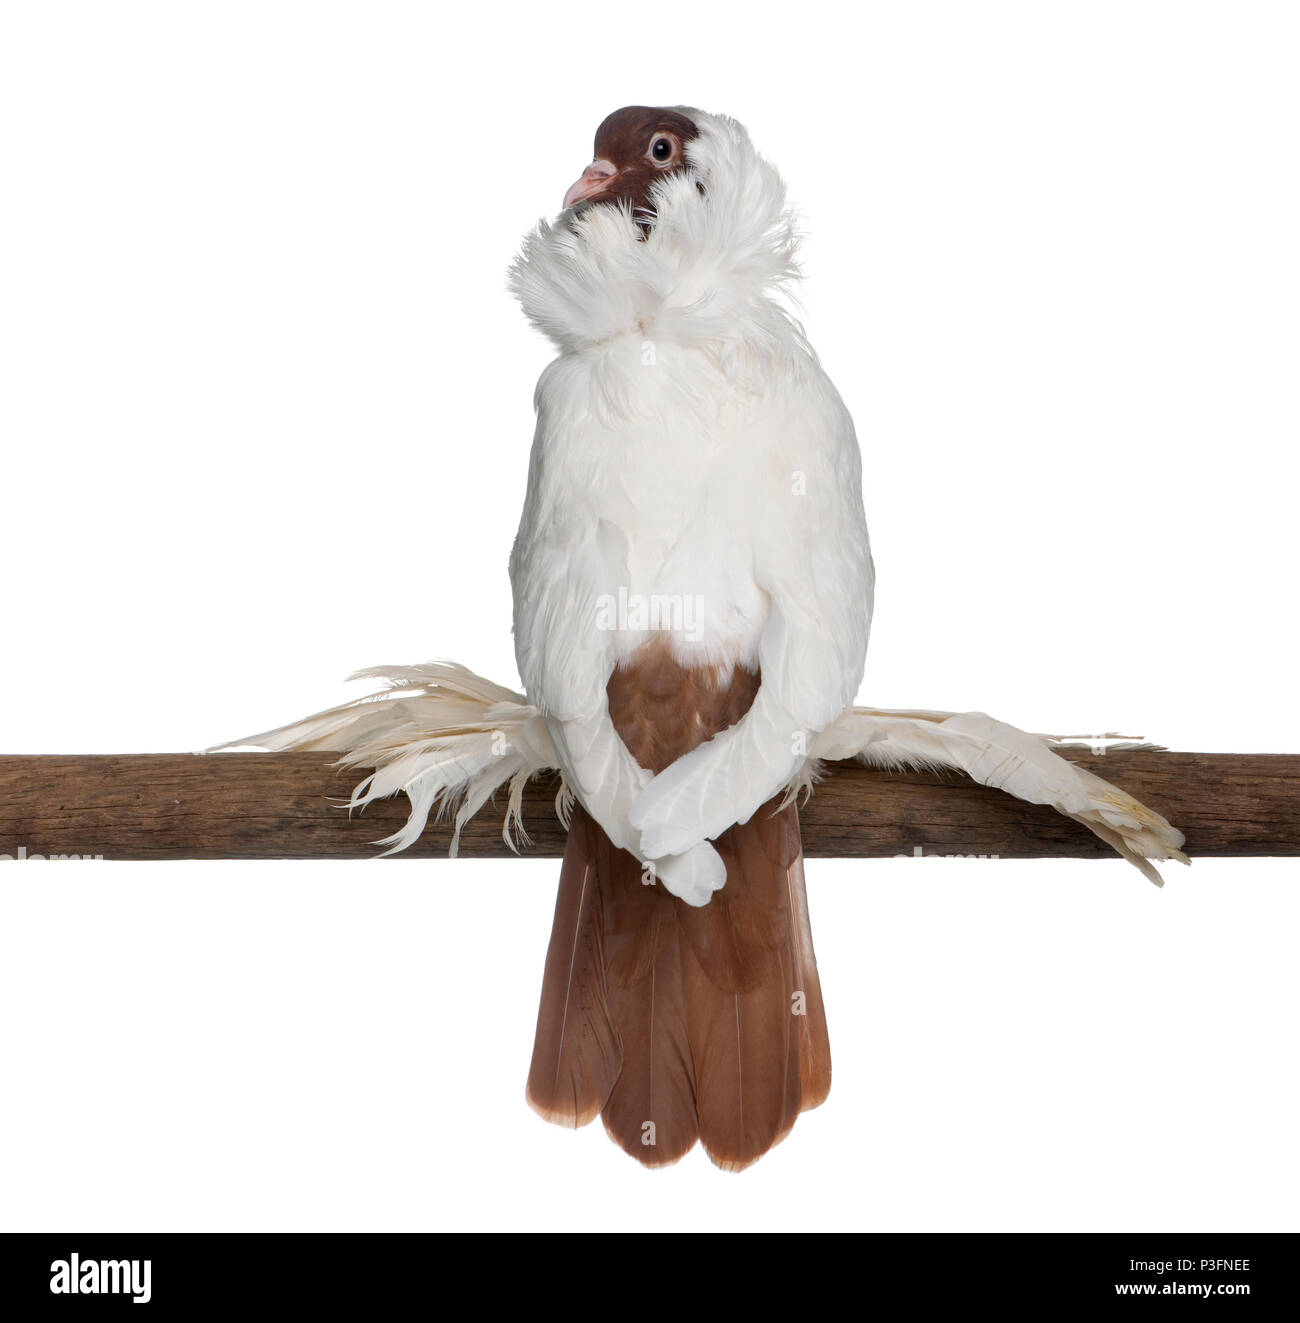 German helmet with feathered feet pigeon perched on stick in front of white background Stock Photo